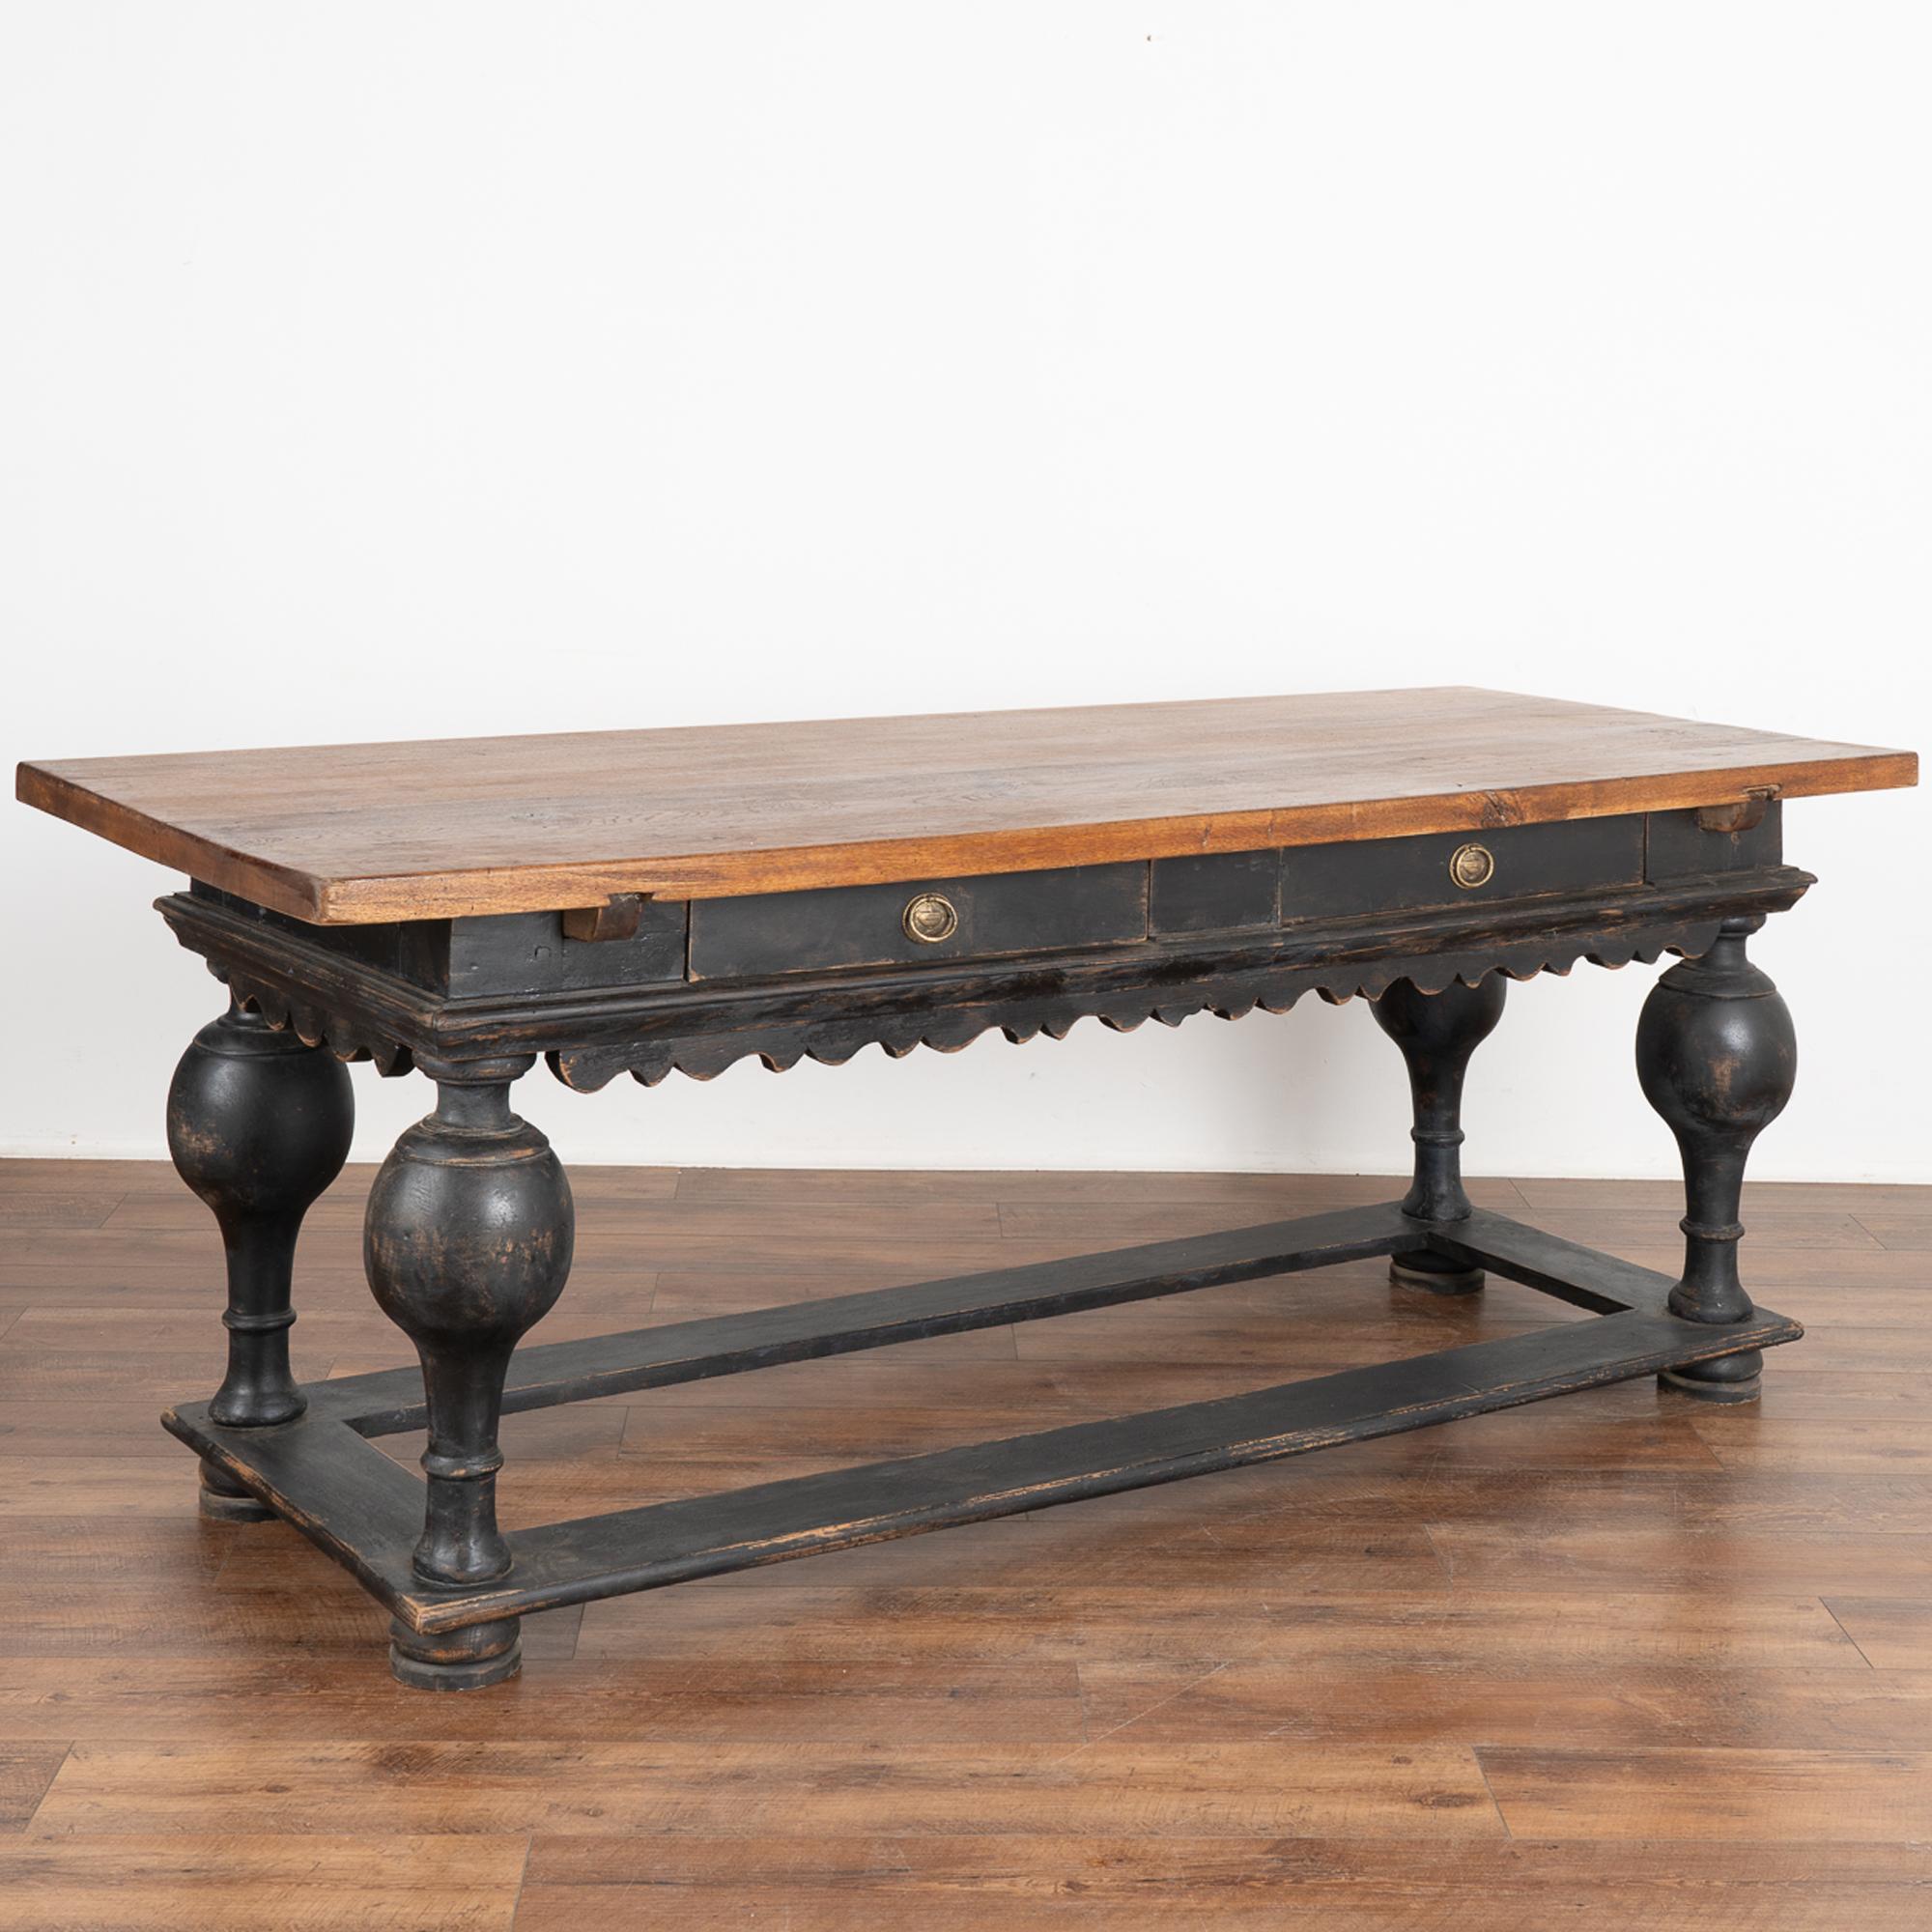 This handsome baroque library table with two drawers has heavily turned legs and a scalloped skirt.
The base has been given a newer, professionally applied black finish and is lightly distressed revealing the natural wood below while complimenting